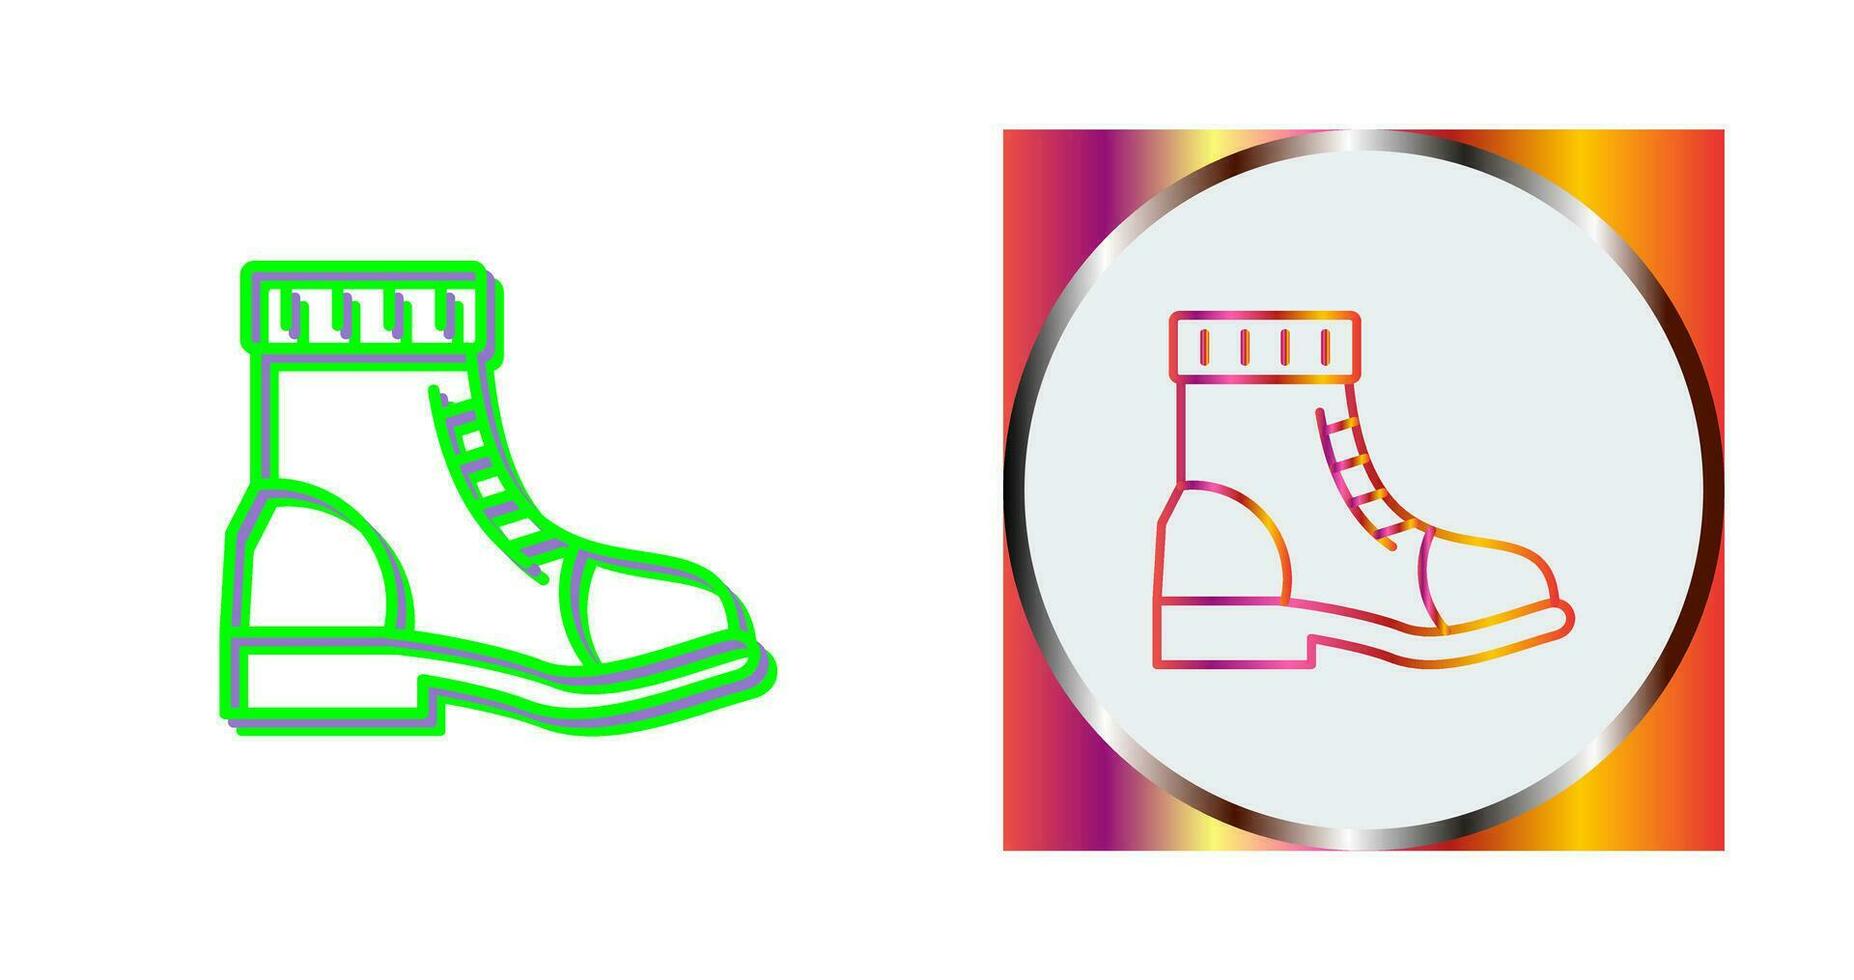 Boots Vector Icon